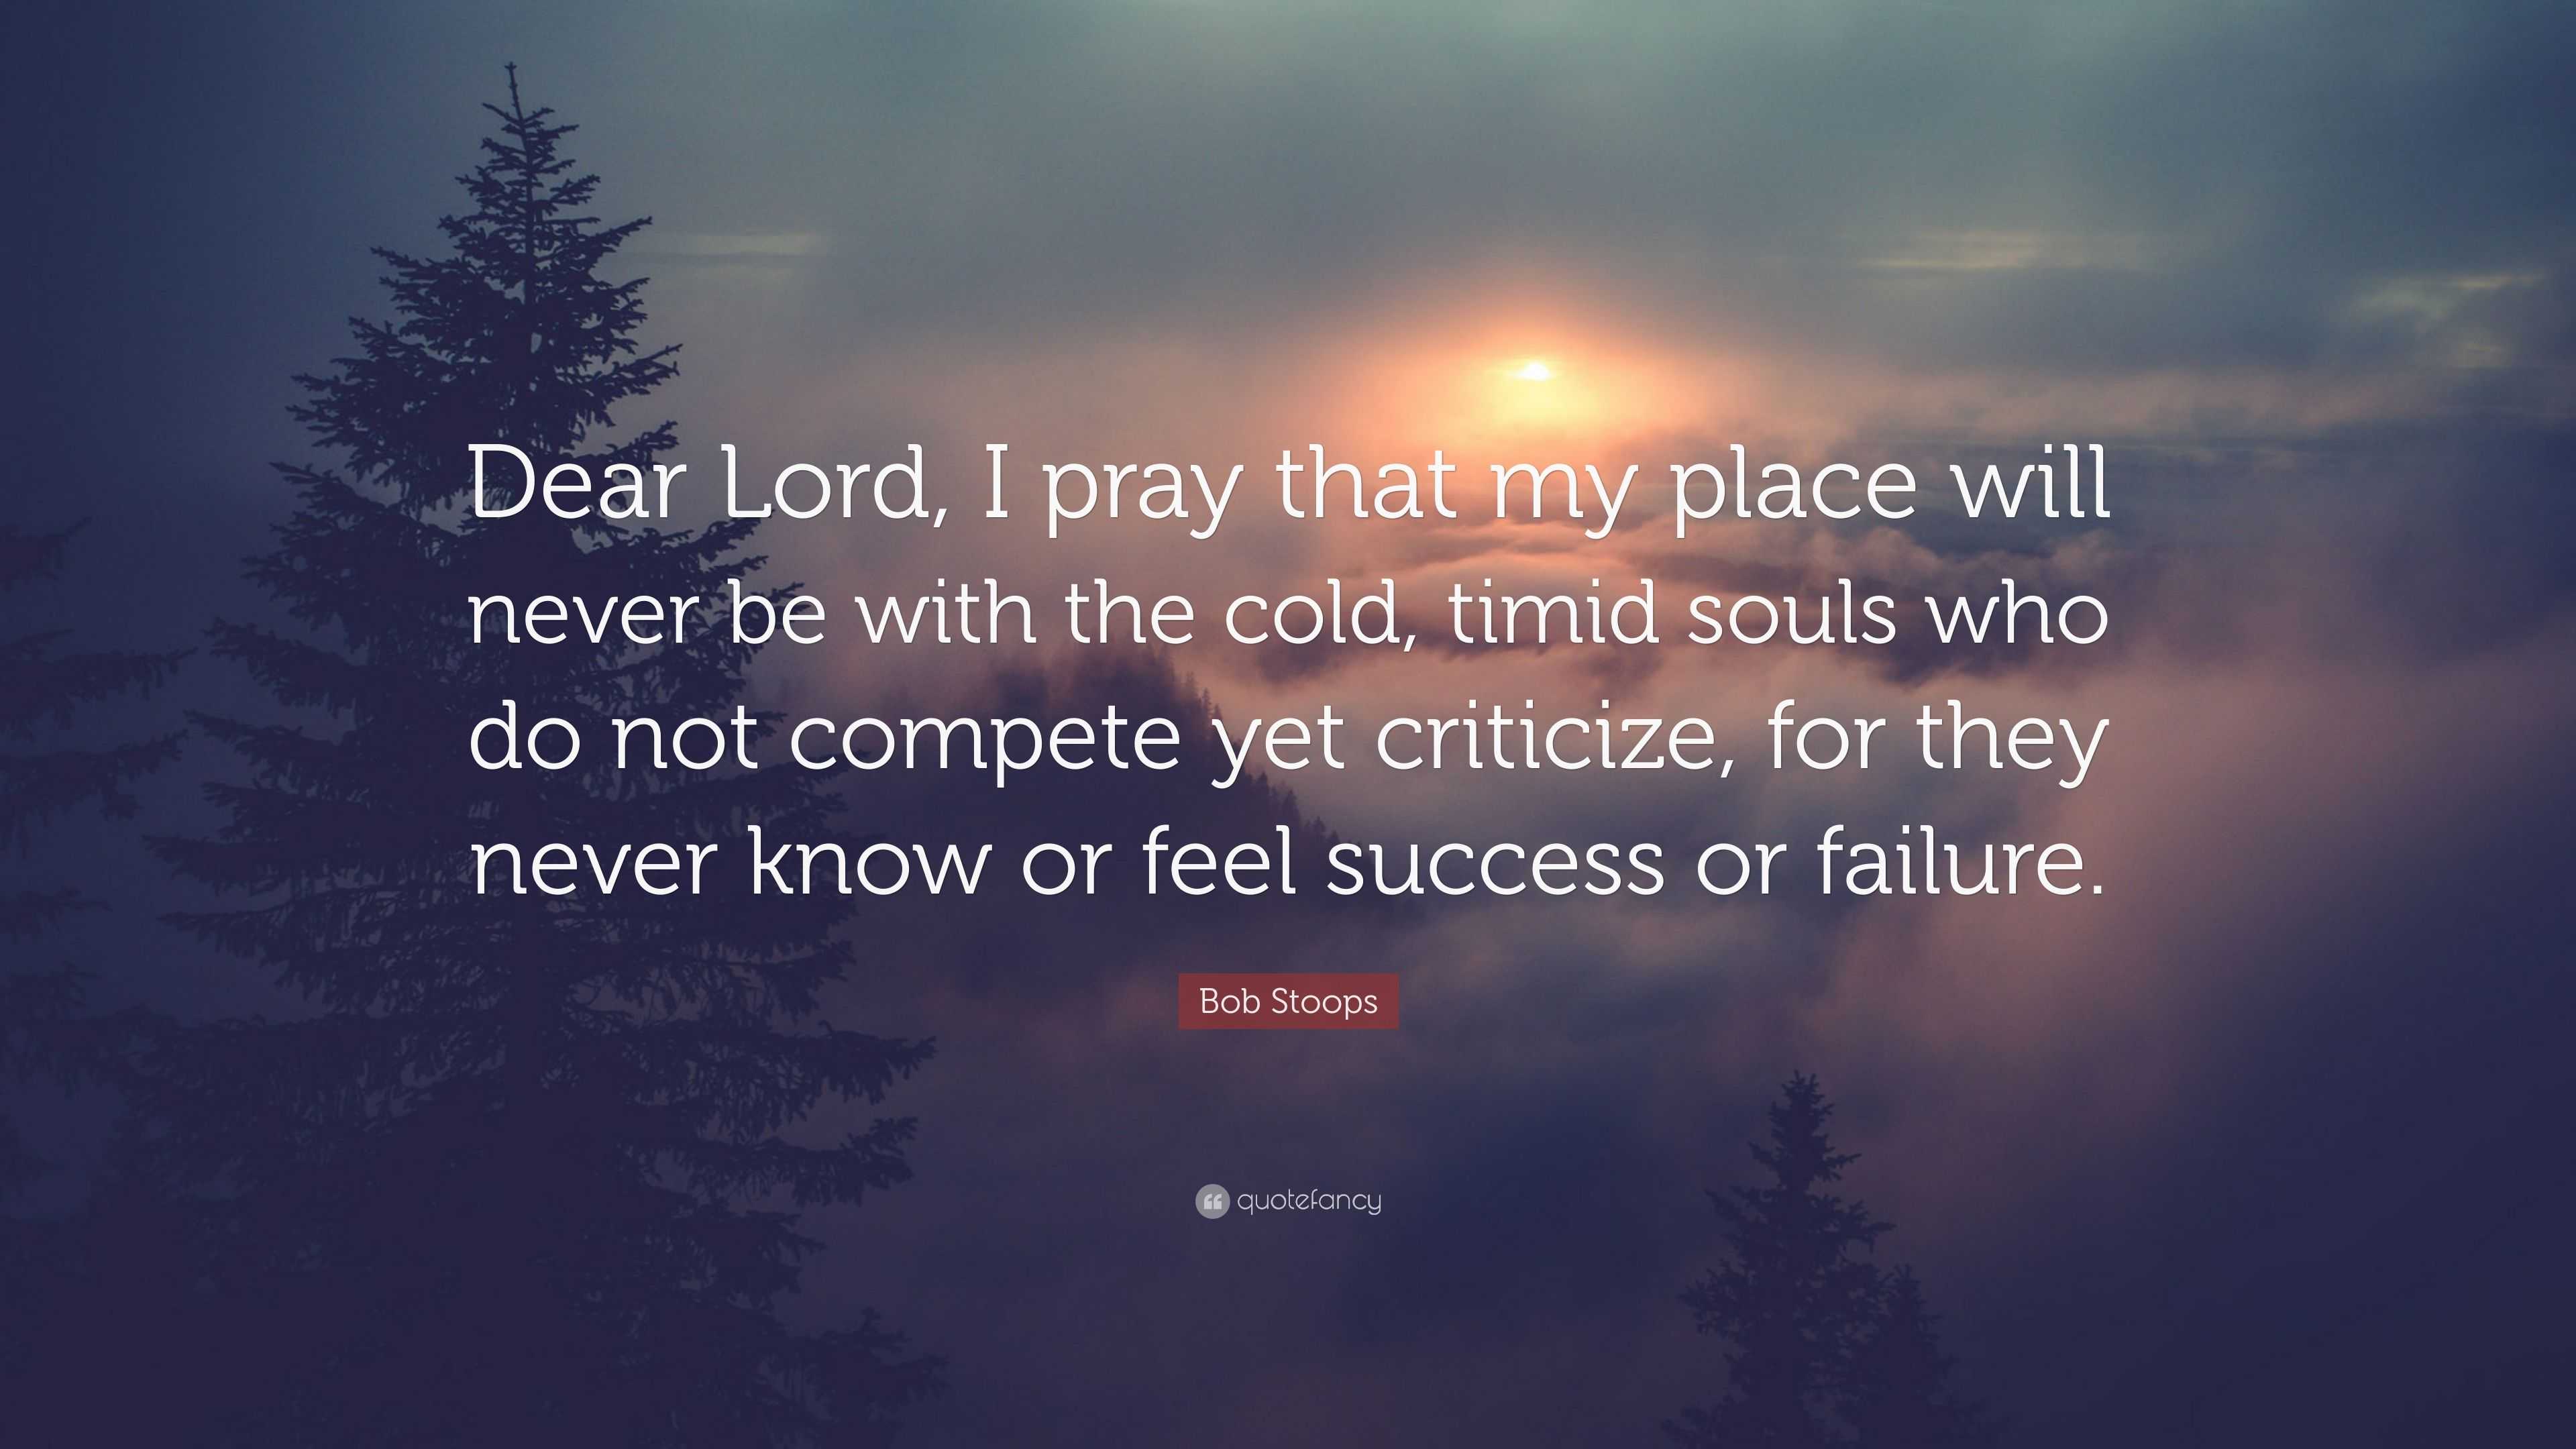 Bob Stoops Quote: “Dear Lord, I pray that my place will never be with ...